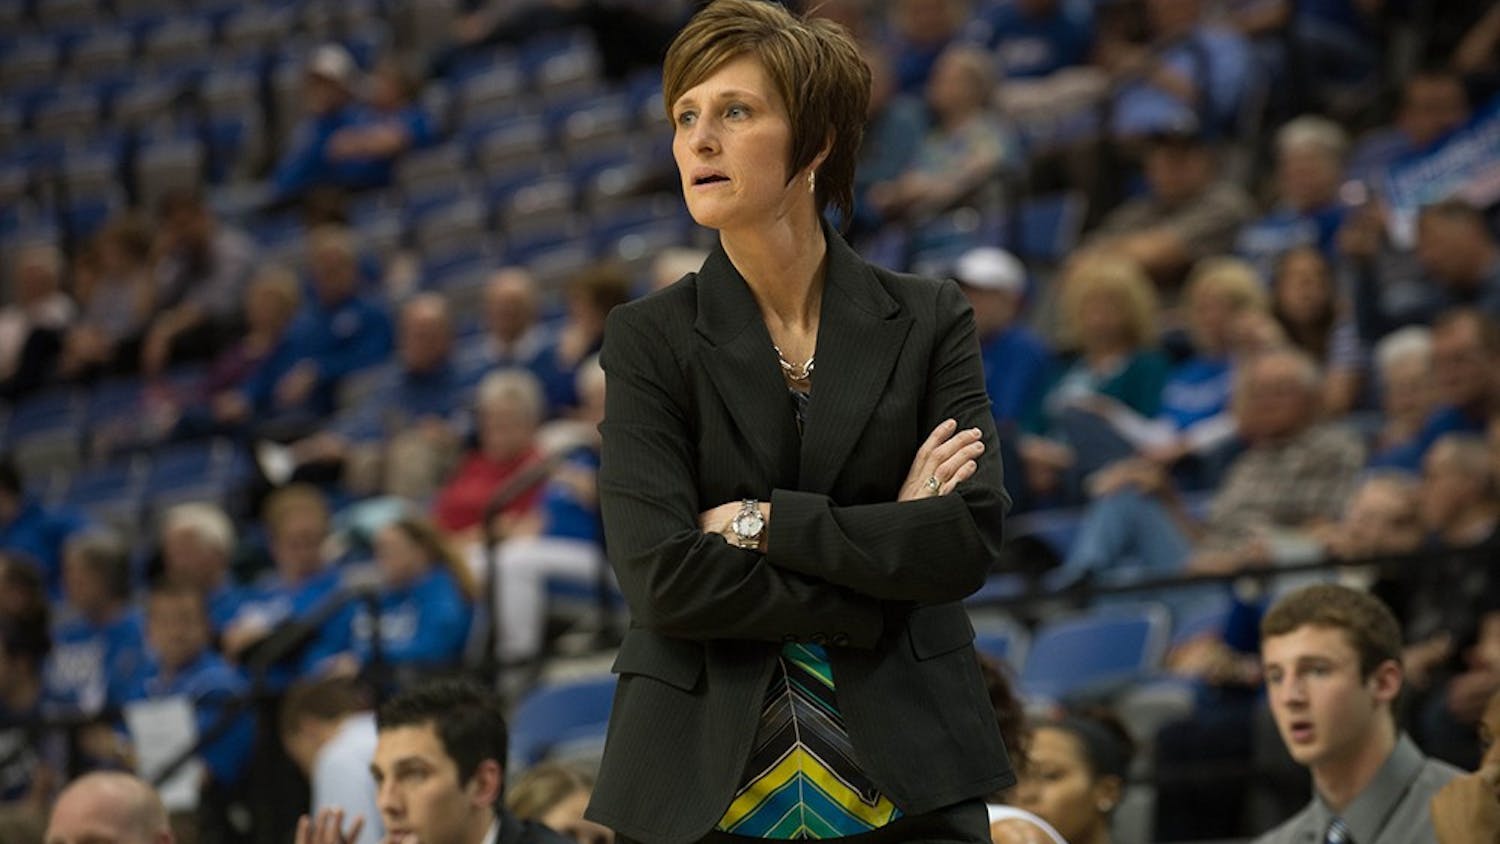 Then Indiana State Coach Teri Moren during a game against IU. Moren is the new IU Women's Basketball coach.